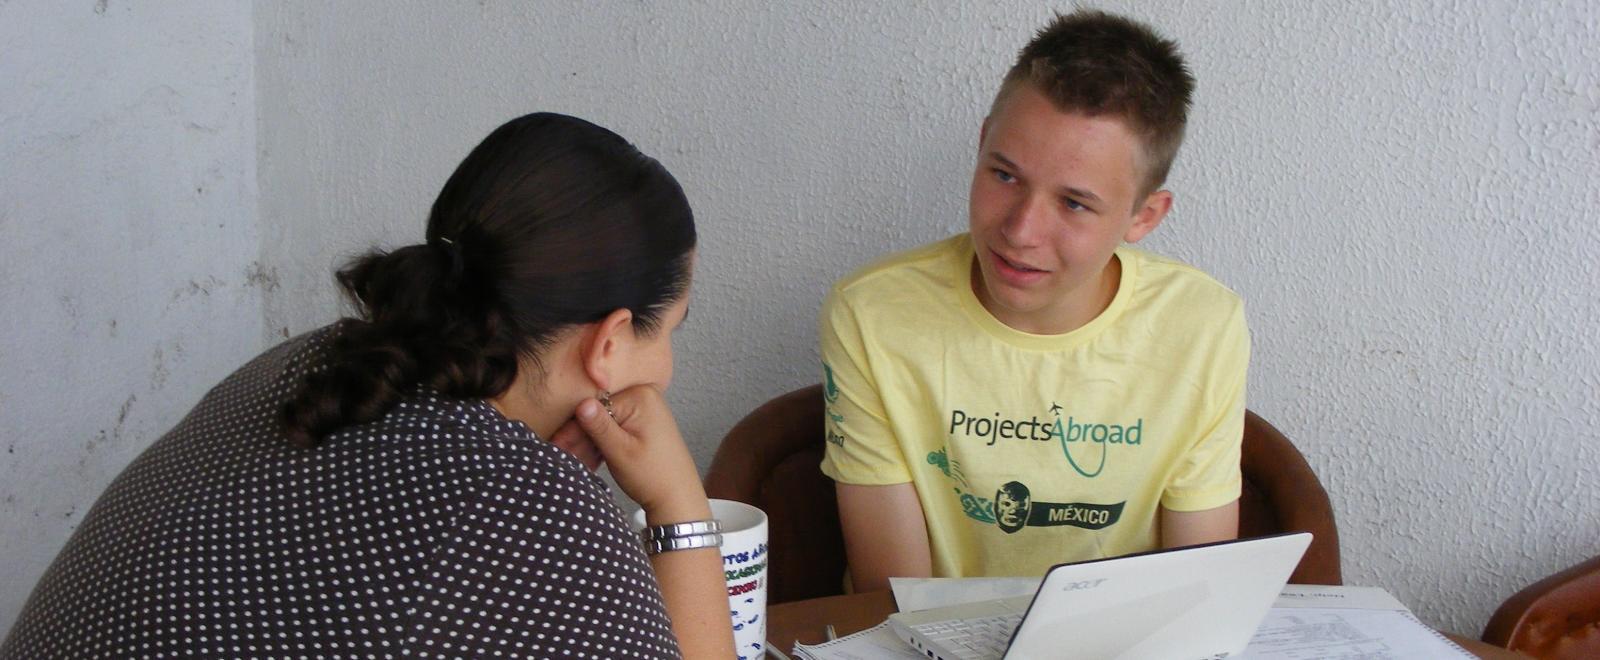 A young volunteer receives a Spanish language lesson as part of his induction at the Projects Abroad office.